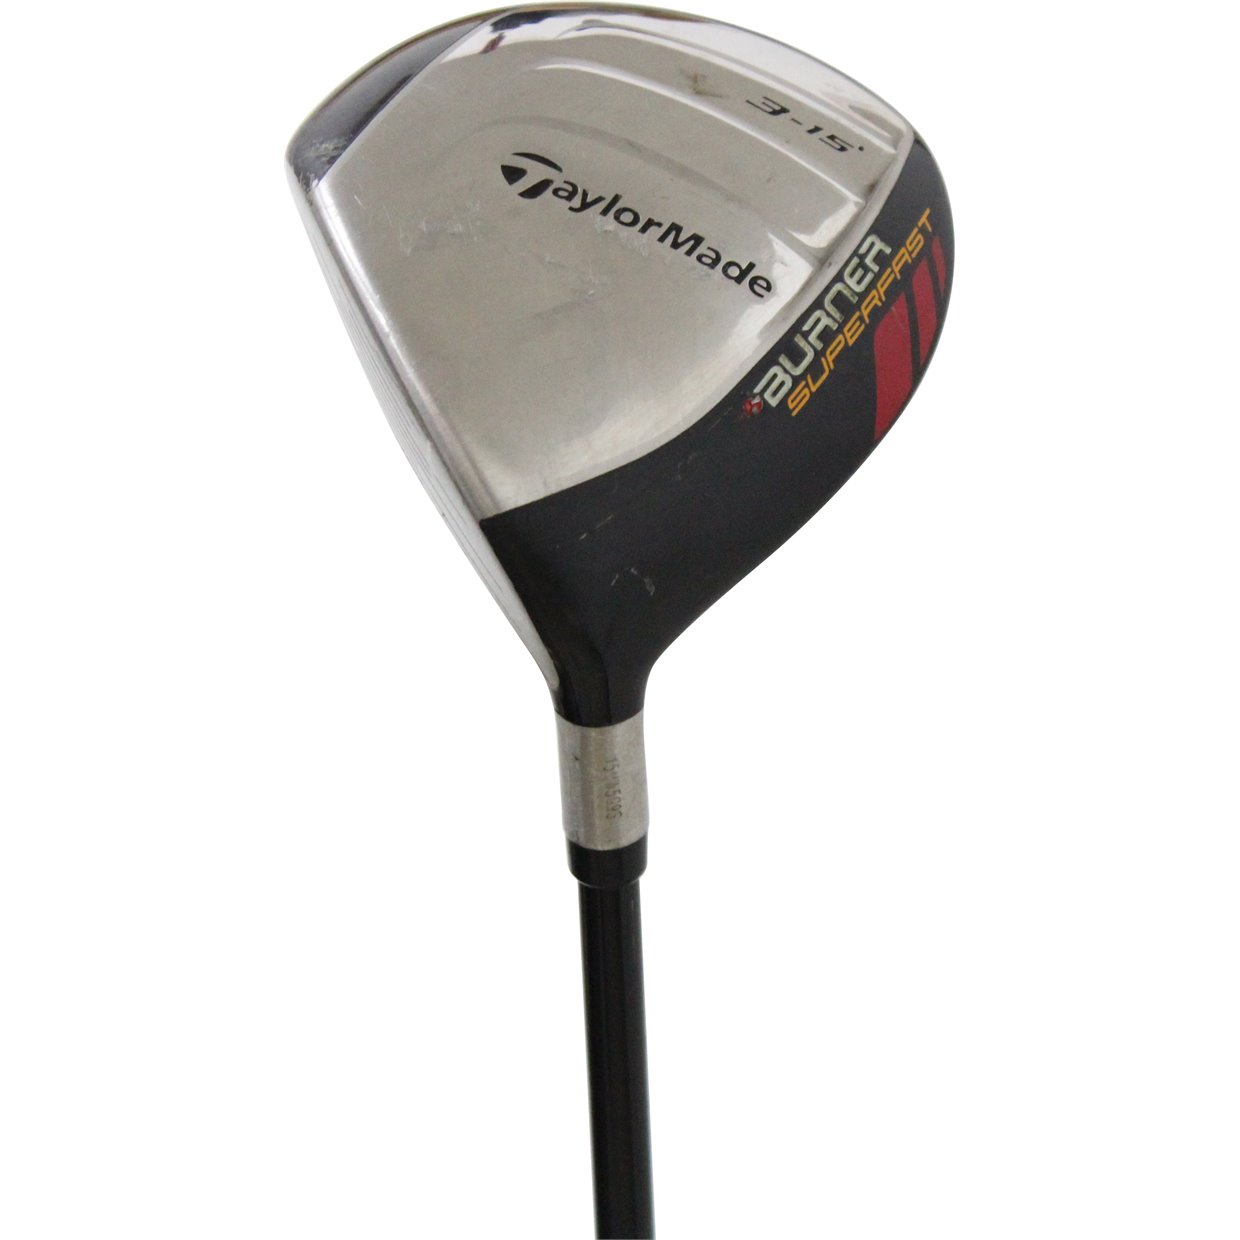 Taylormade Superfast Driver Review